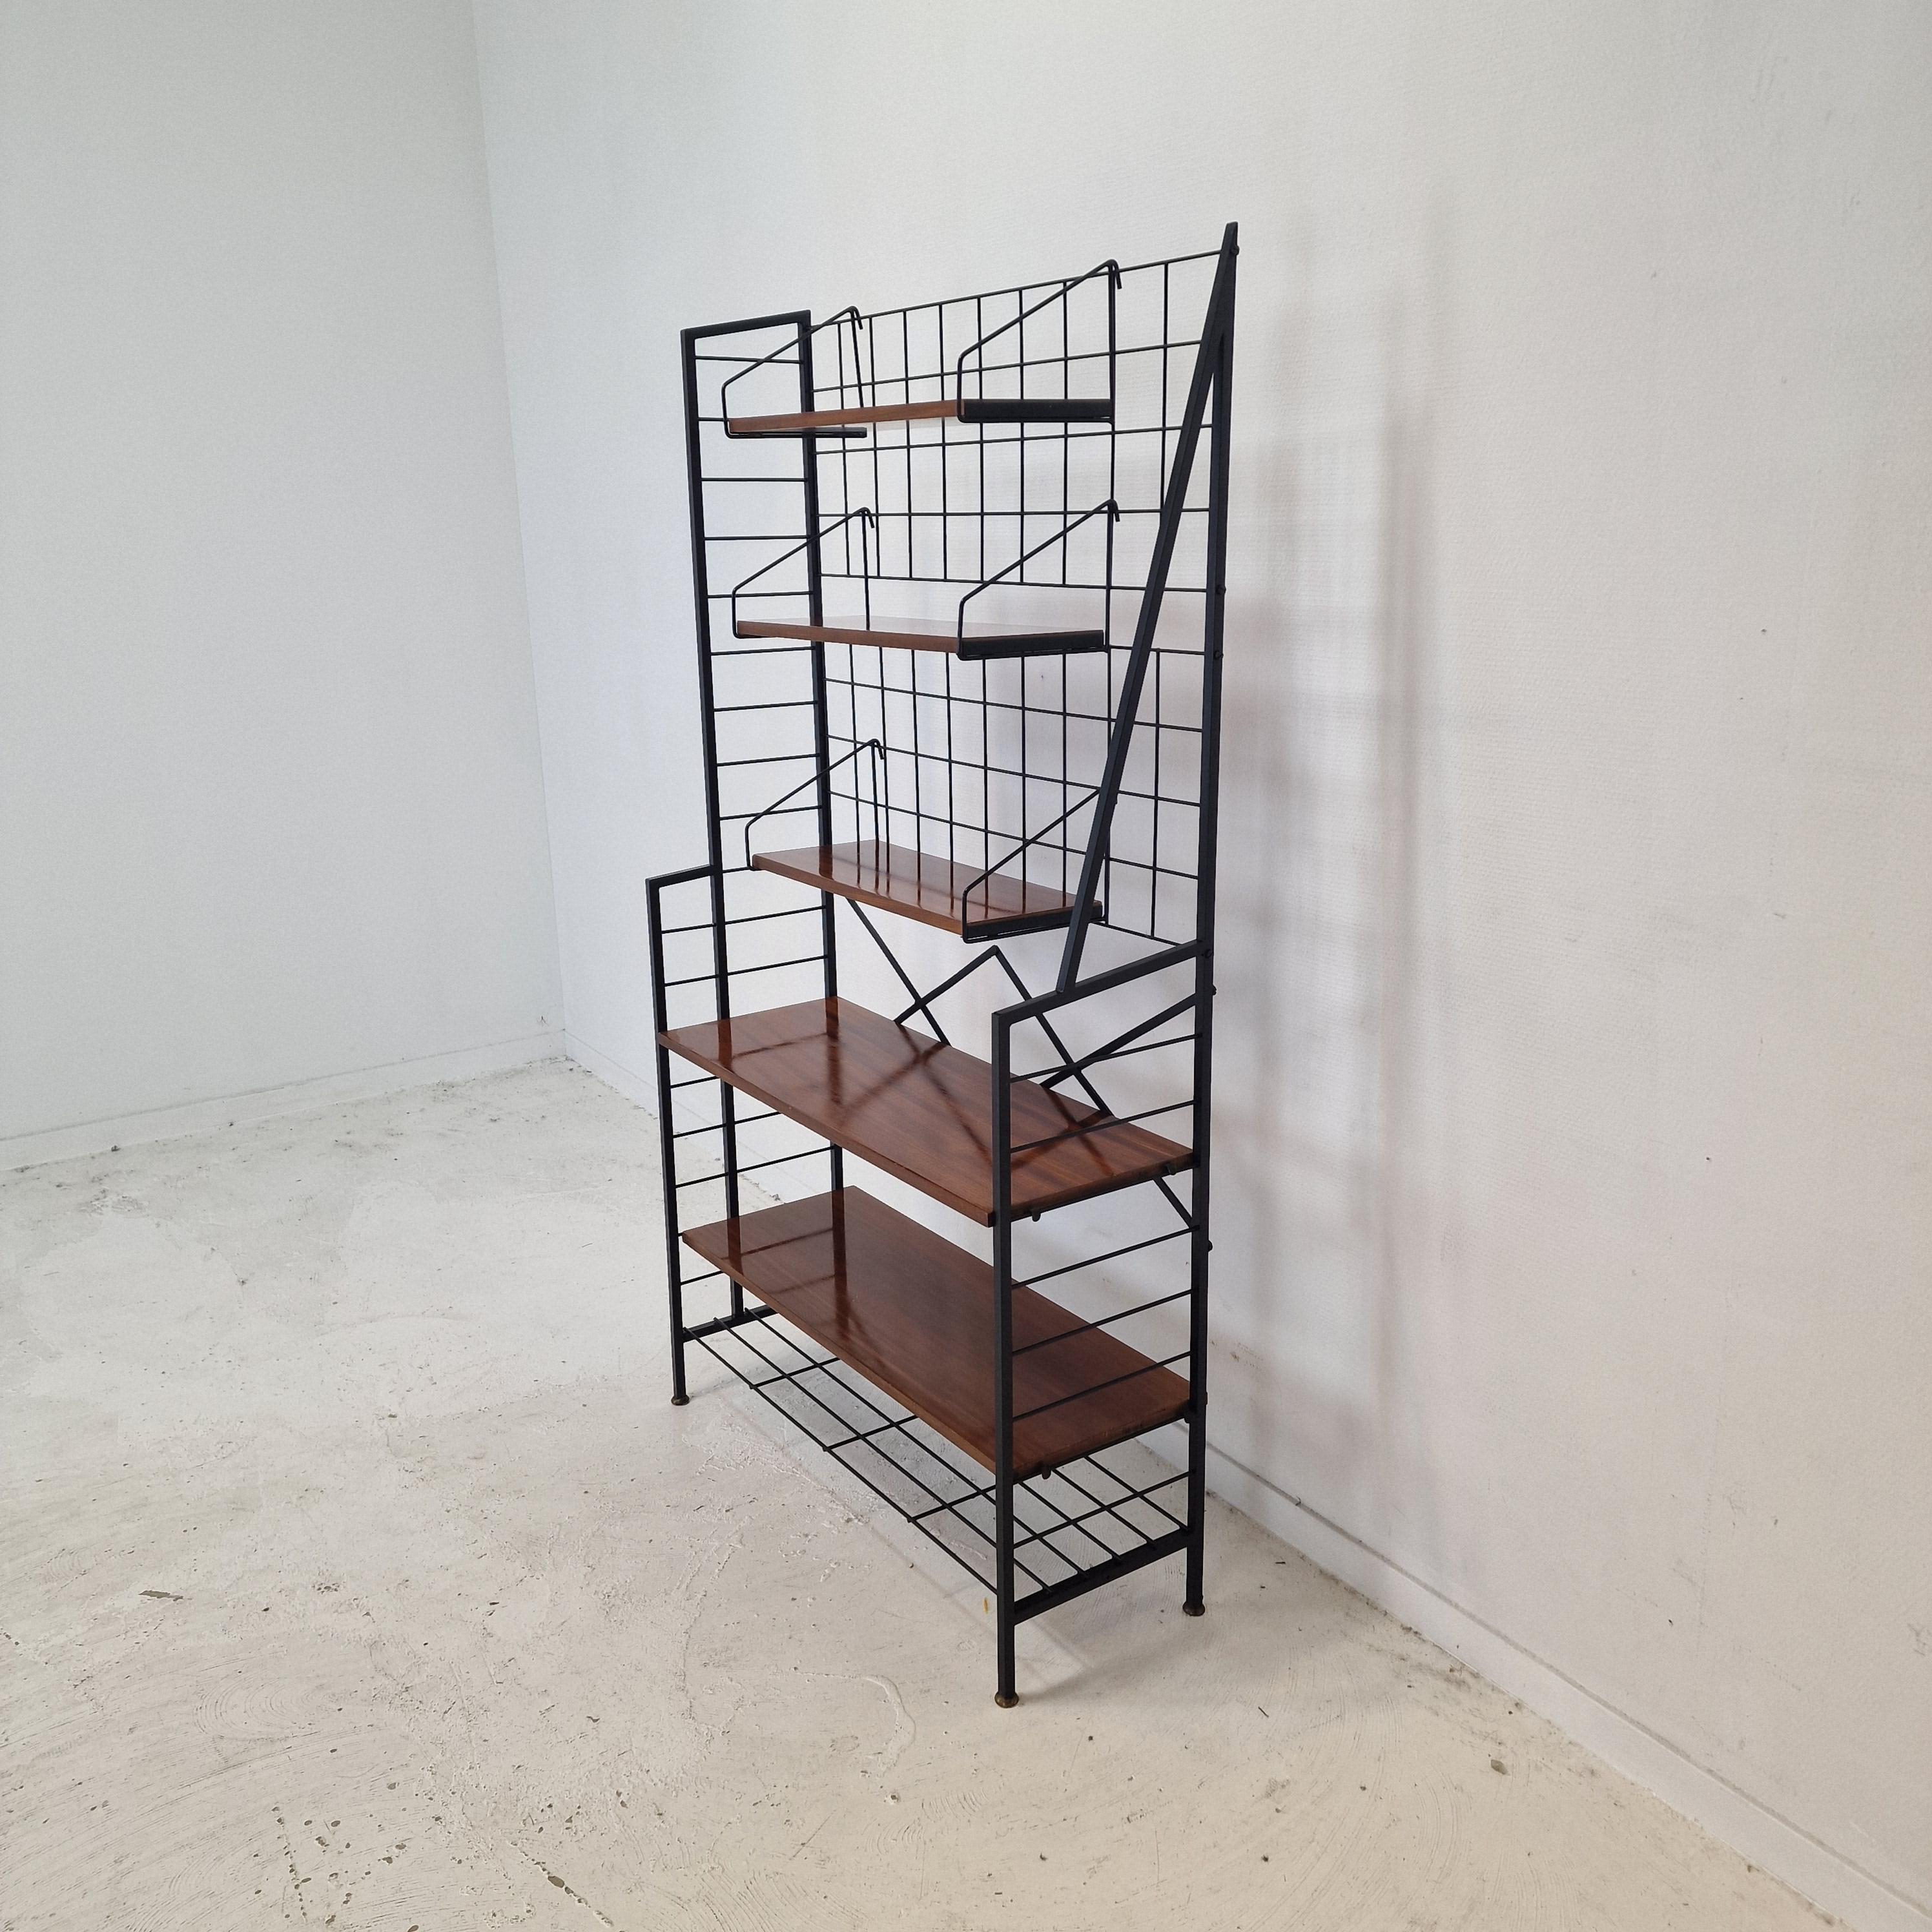 Very nice free standing shelve system, fabricated in Italy in the 50's.

Wooden (teak veneer) shelves with a black painted metal system.

It is very easy to disassemble.

We work with professional packers and shippers, we can deliver worldwide in 5